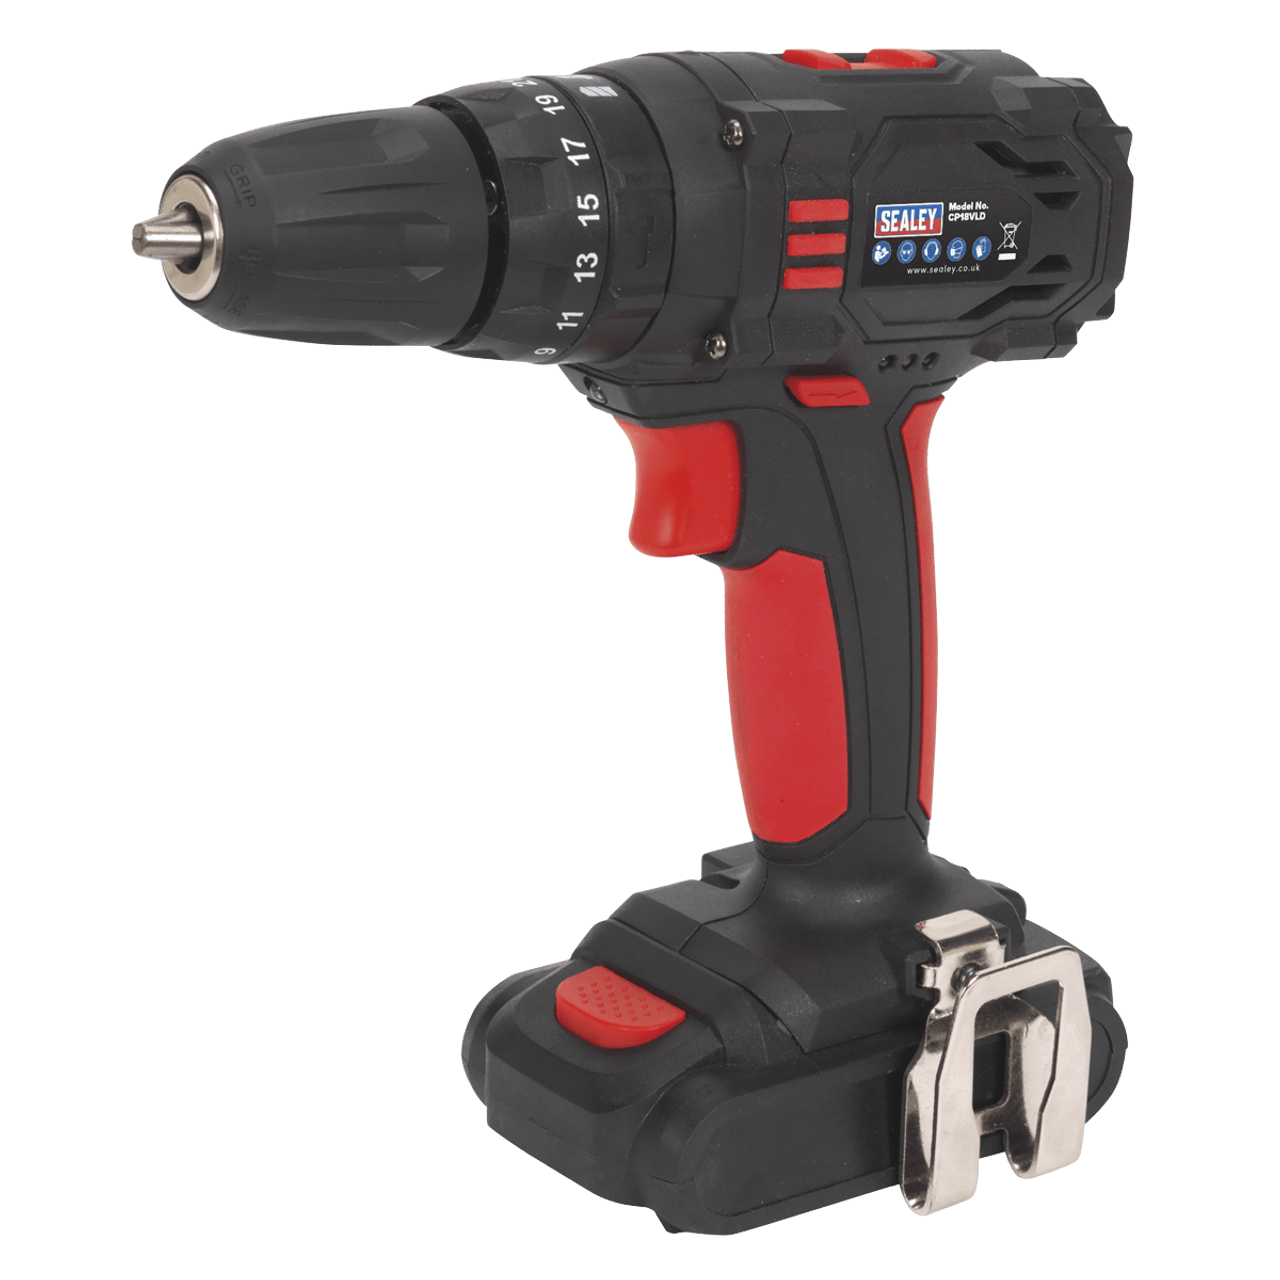 Silverline 18V Combi Hammer Drill 10mm Keyless Chuck with Battery and Charger 